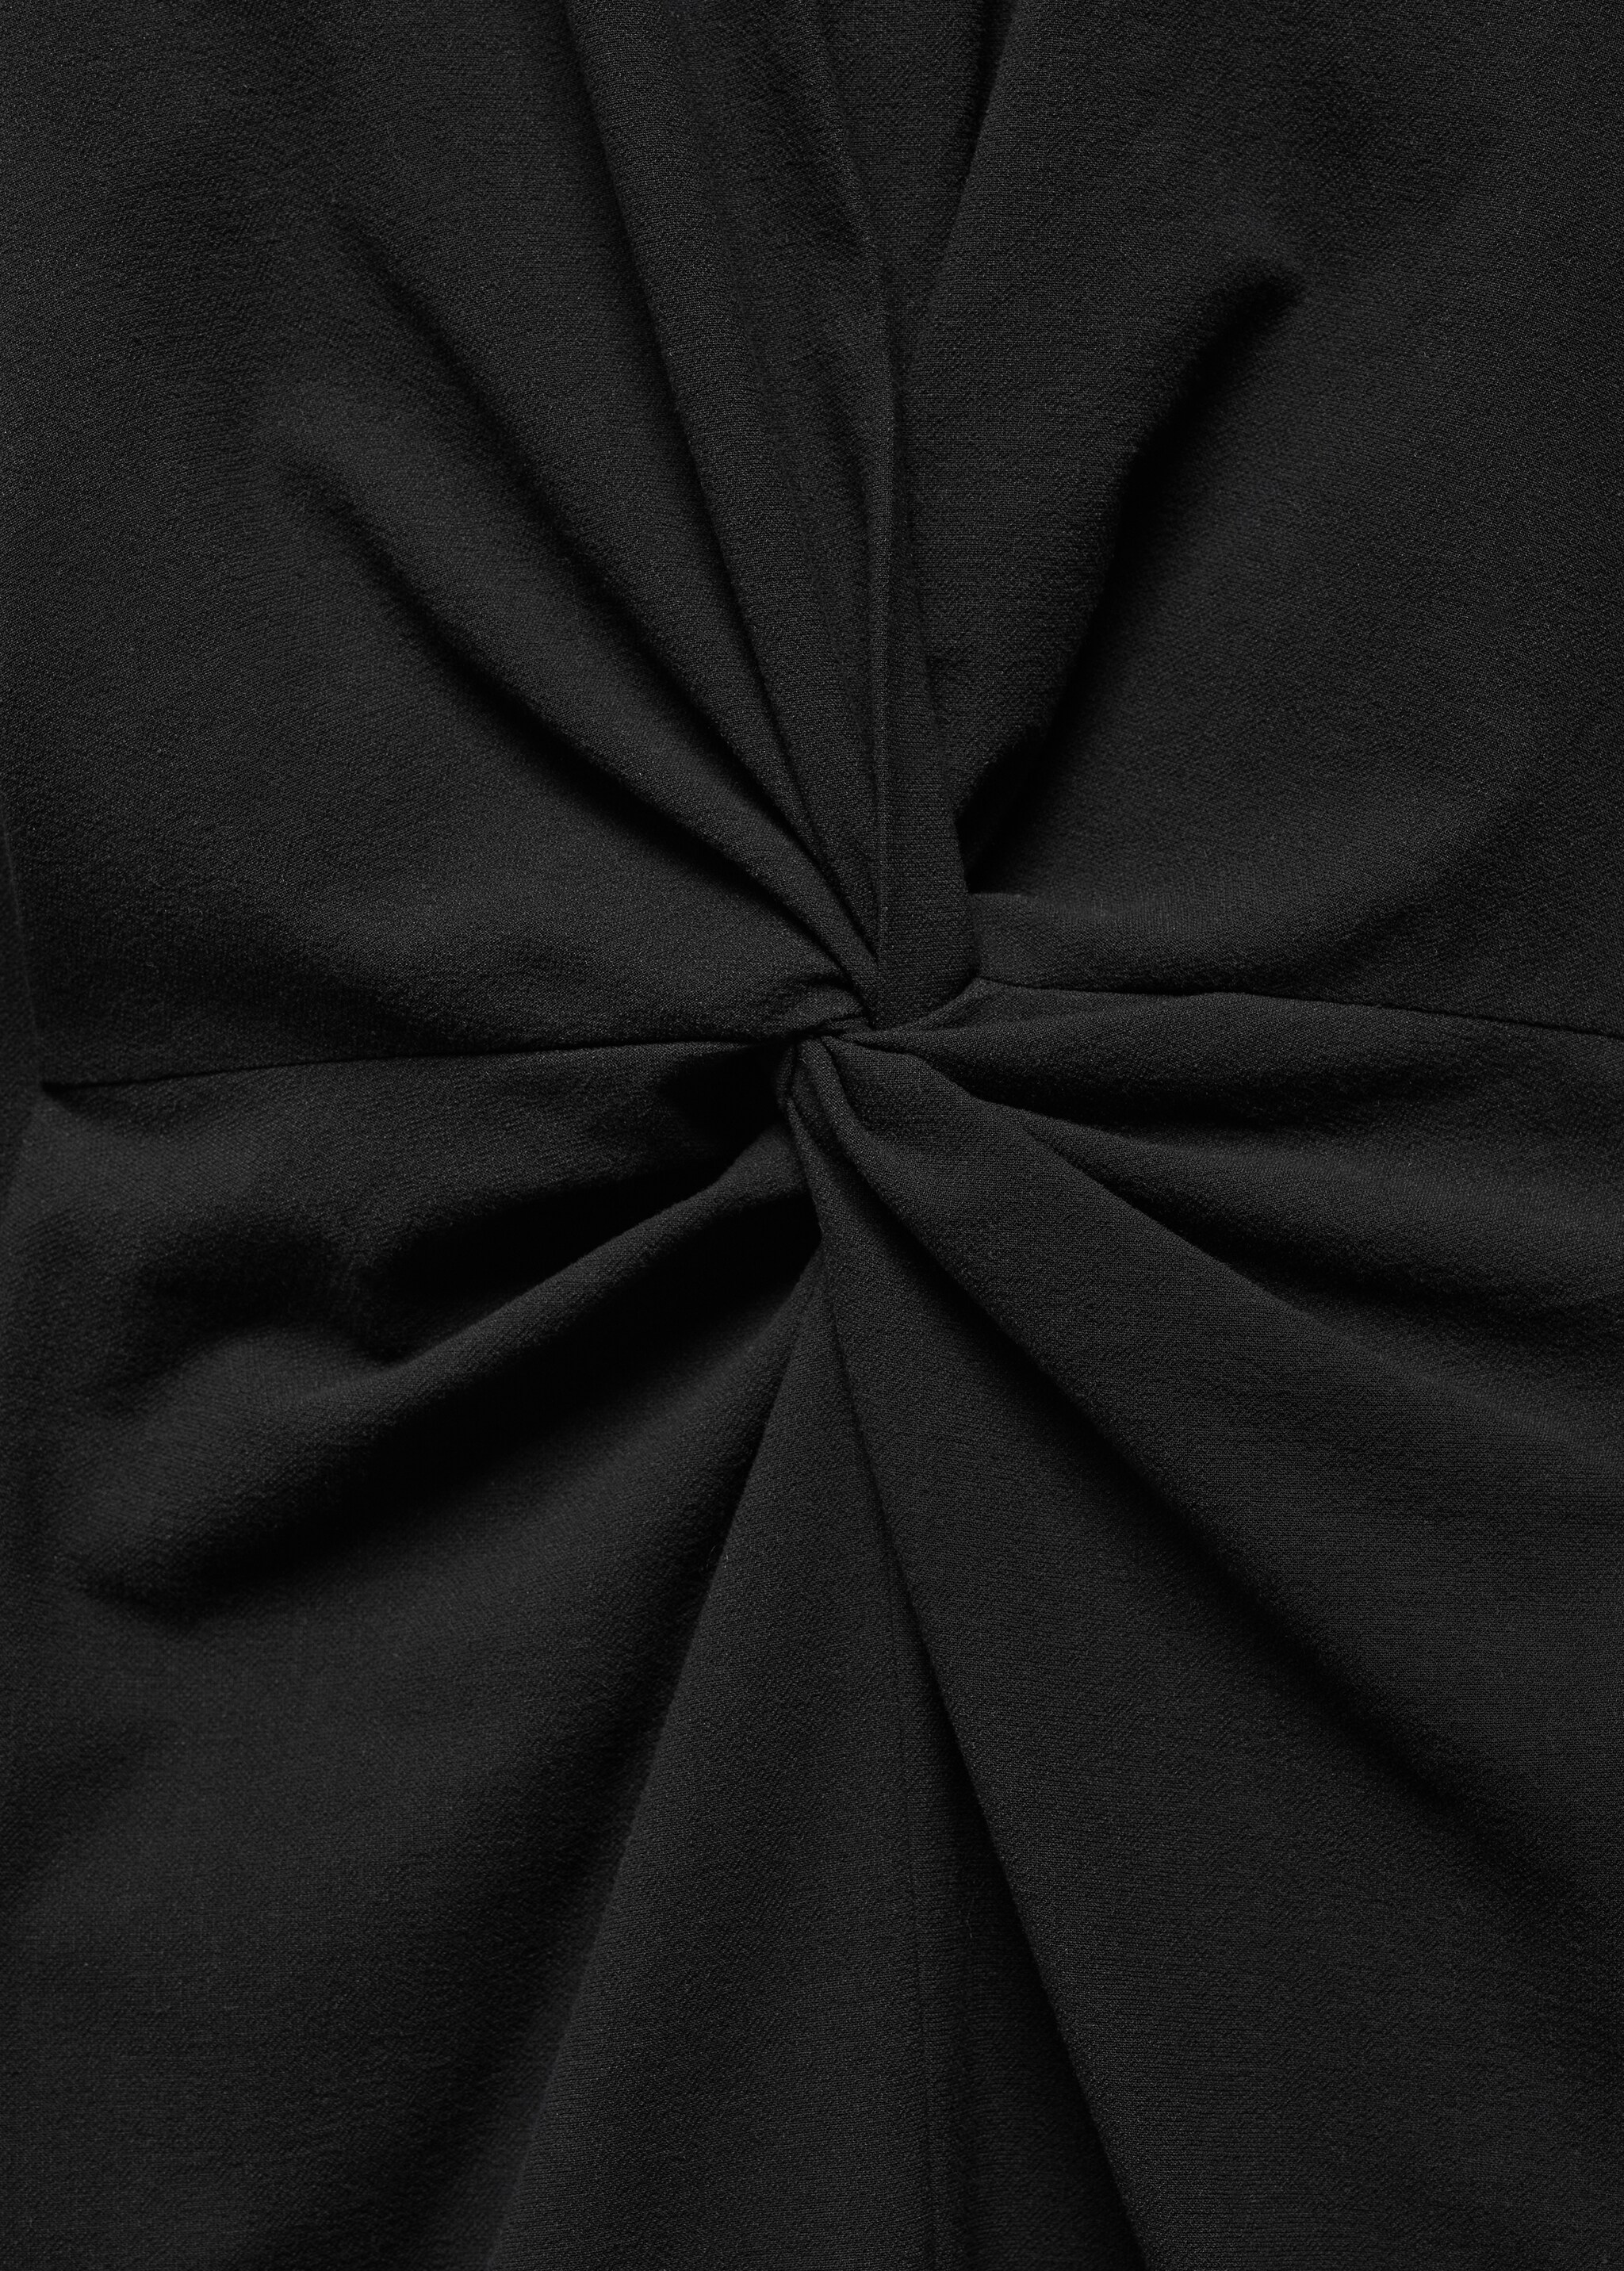 Knot detail dress - Details of the article 8